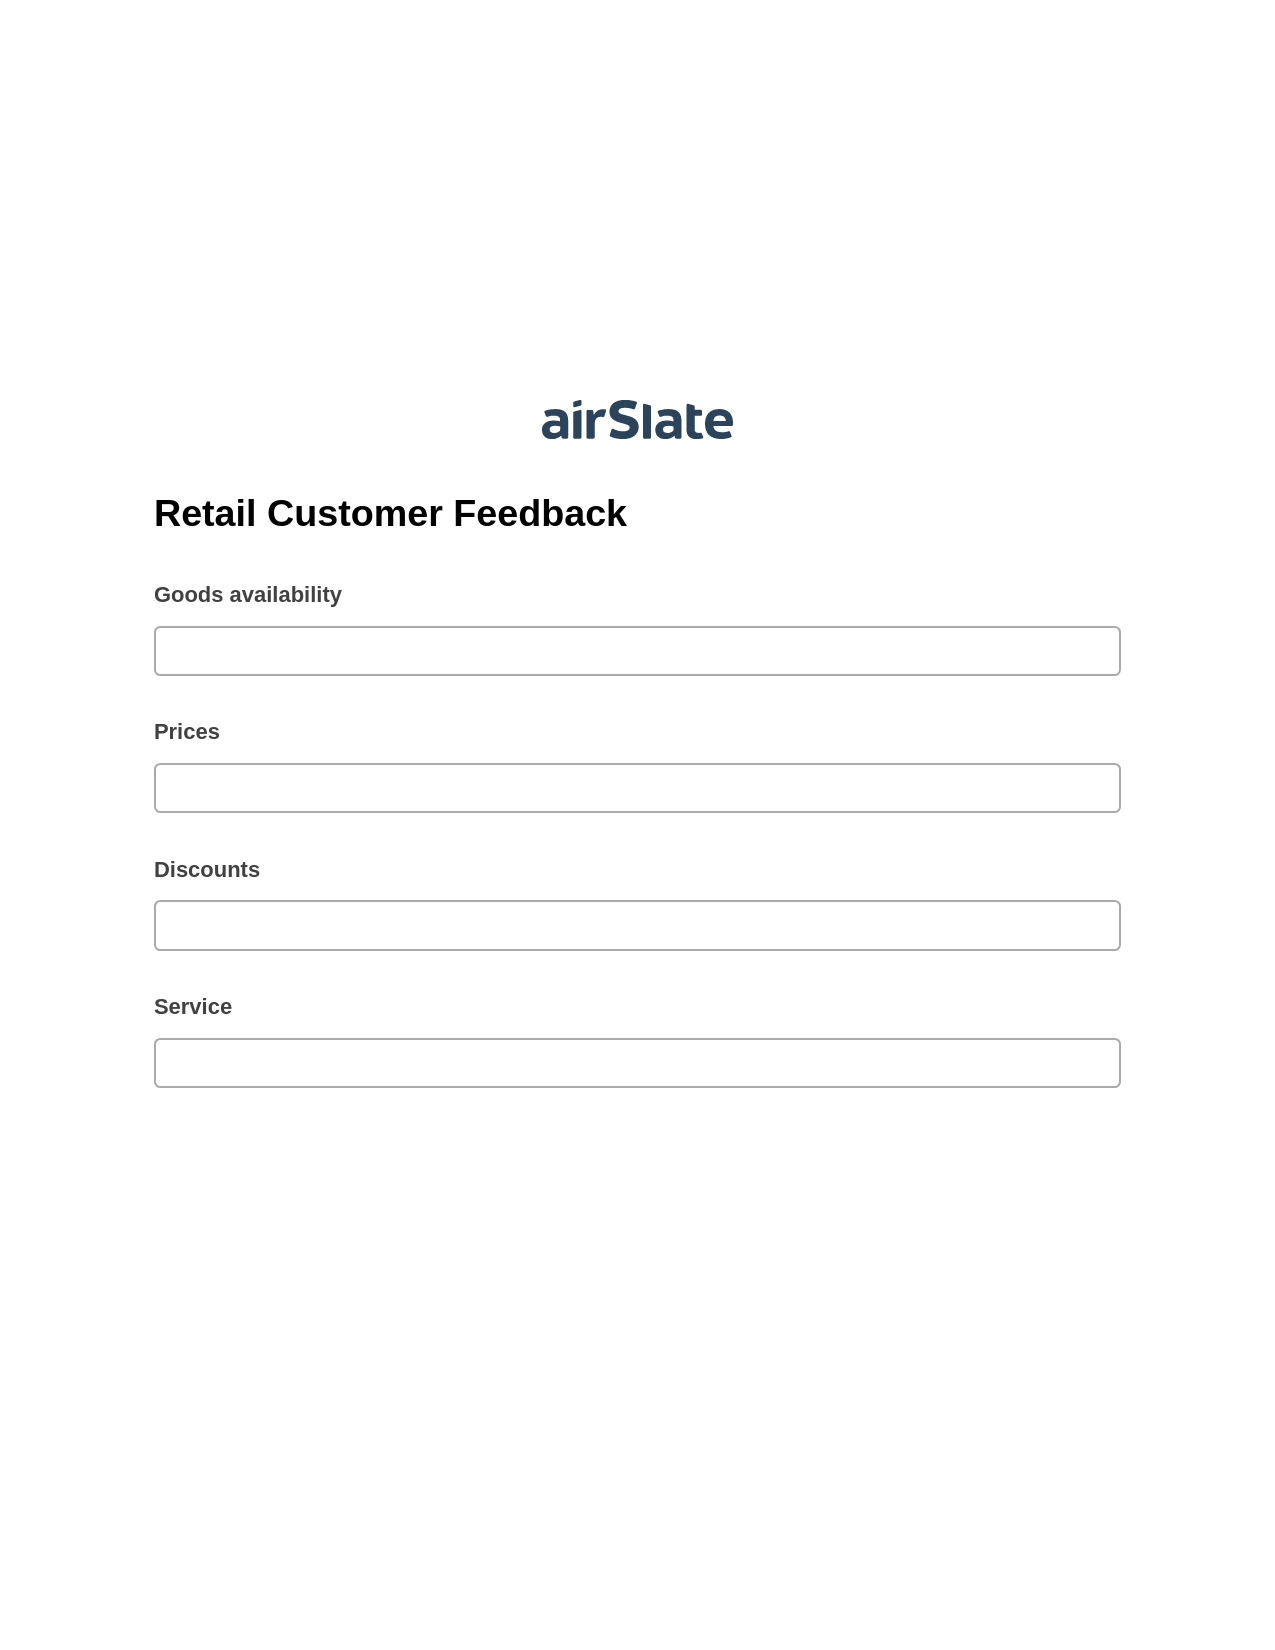 Retail Customer Feedback Pre-fill Slate from MS Dynamics 365 Records Bot, Create NetSuite Records Bot, Export to MySQL Bot